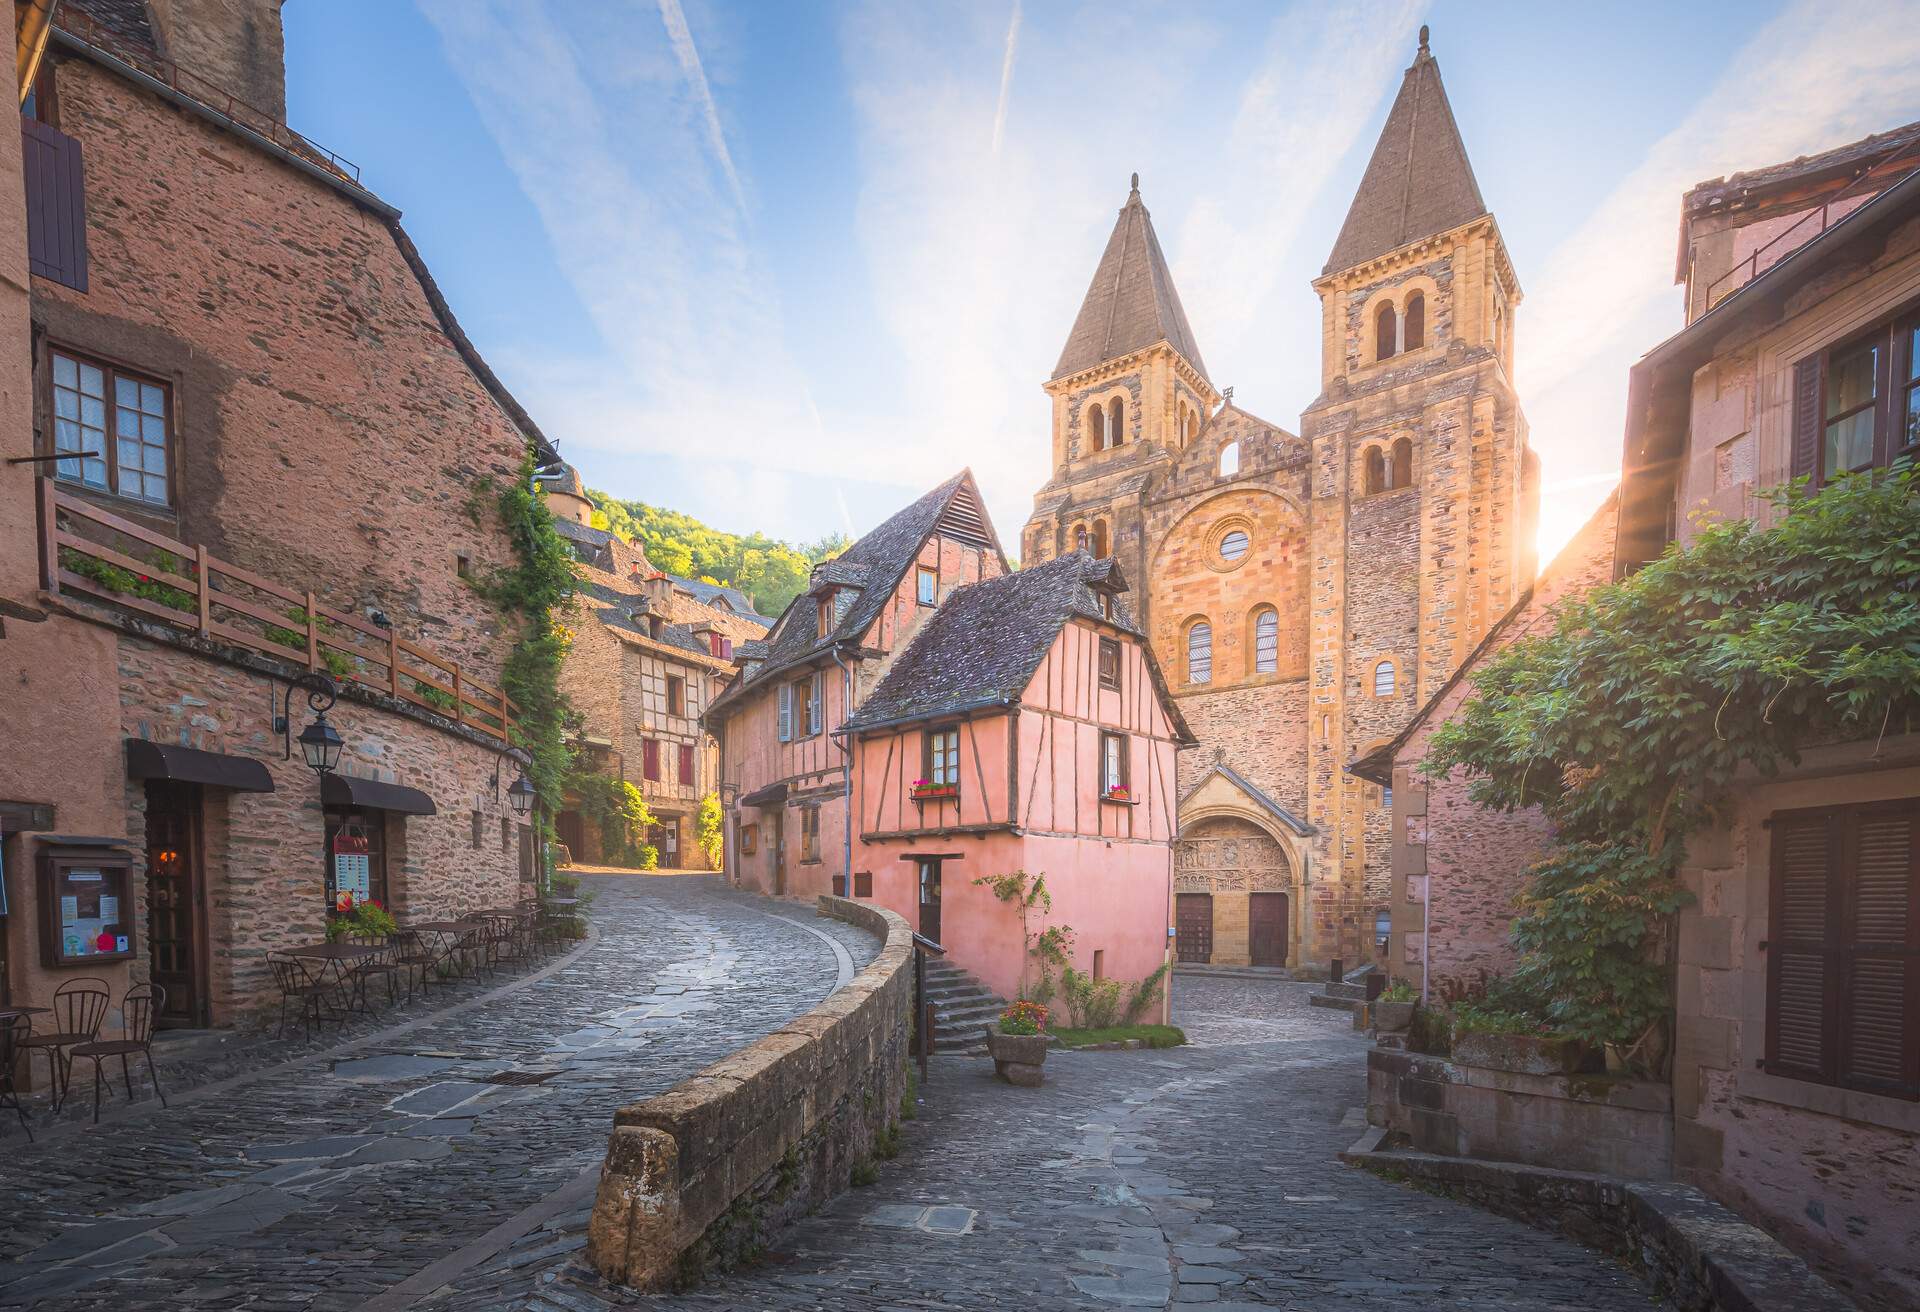 DEST_FRANCE_CONQUES_MIDI_PYRRENEES_AVEYRON_ABBEY_CHURCH_GettyImages